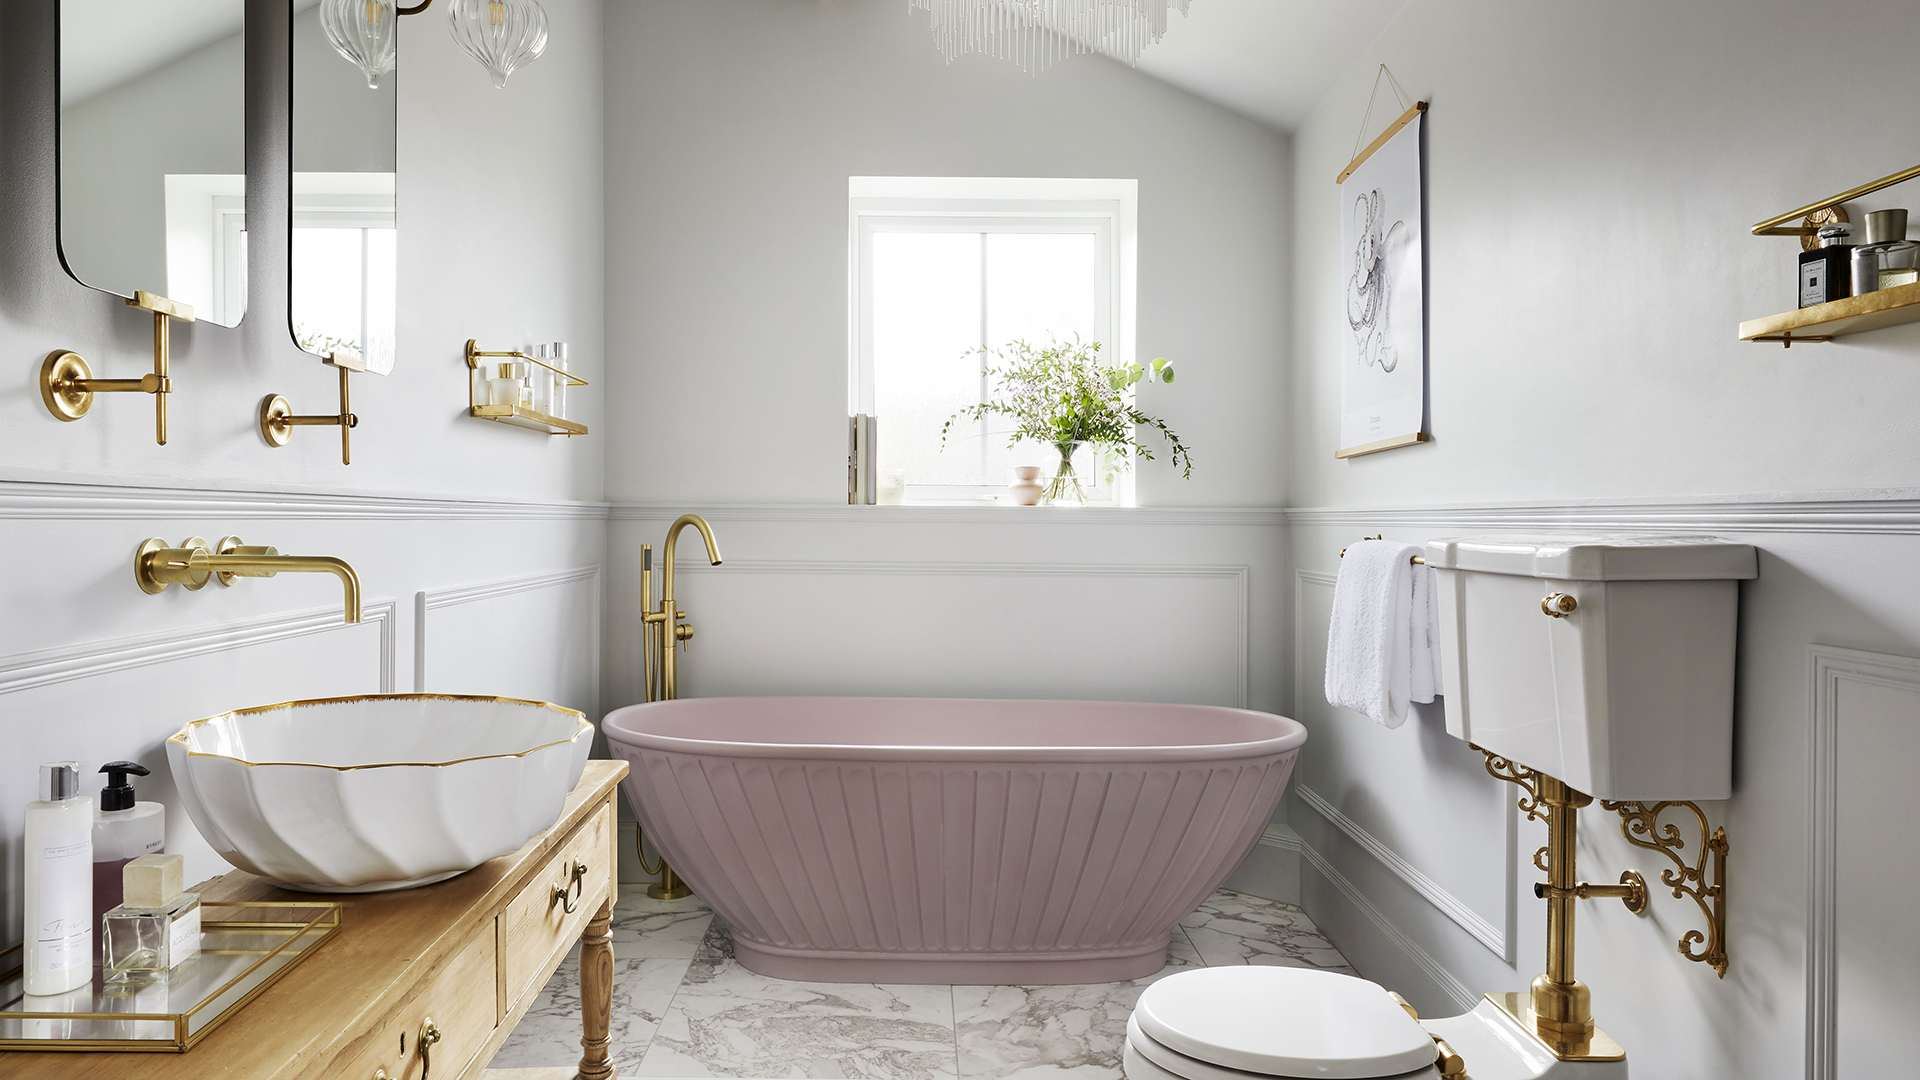 Traditional bathroom ideas – timeless styles & classic decor | Country |